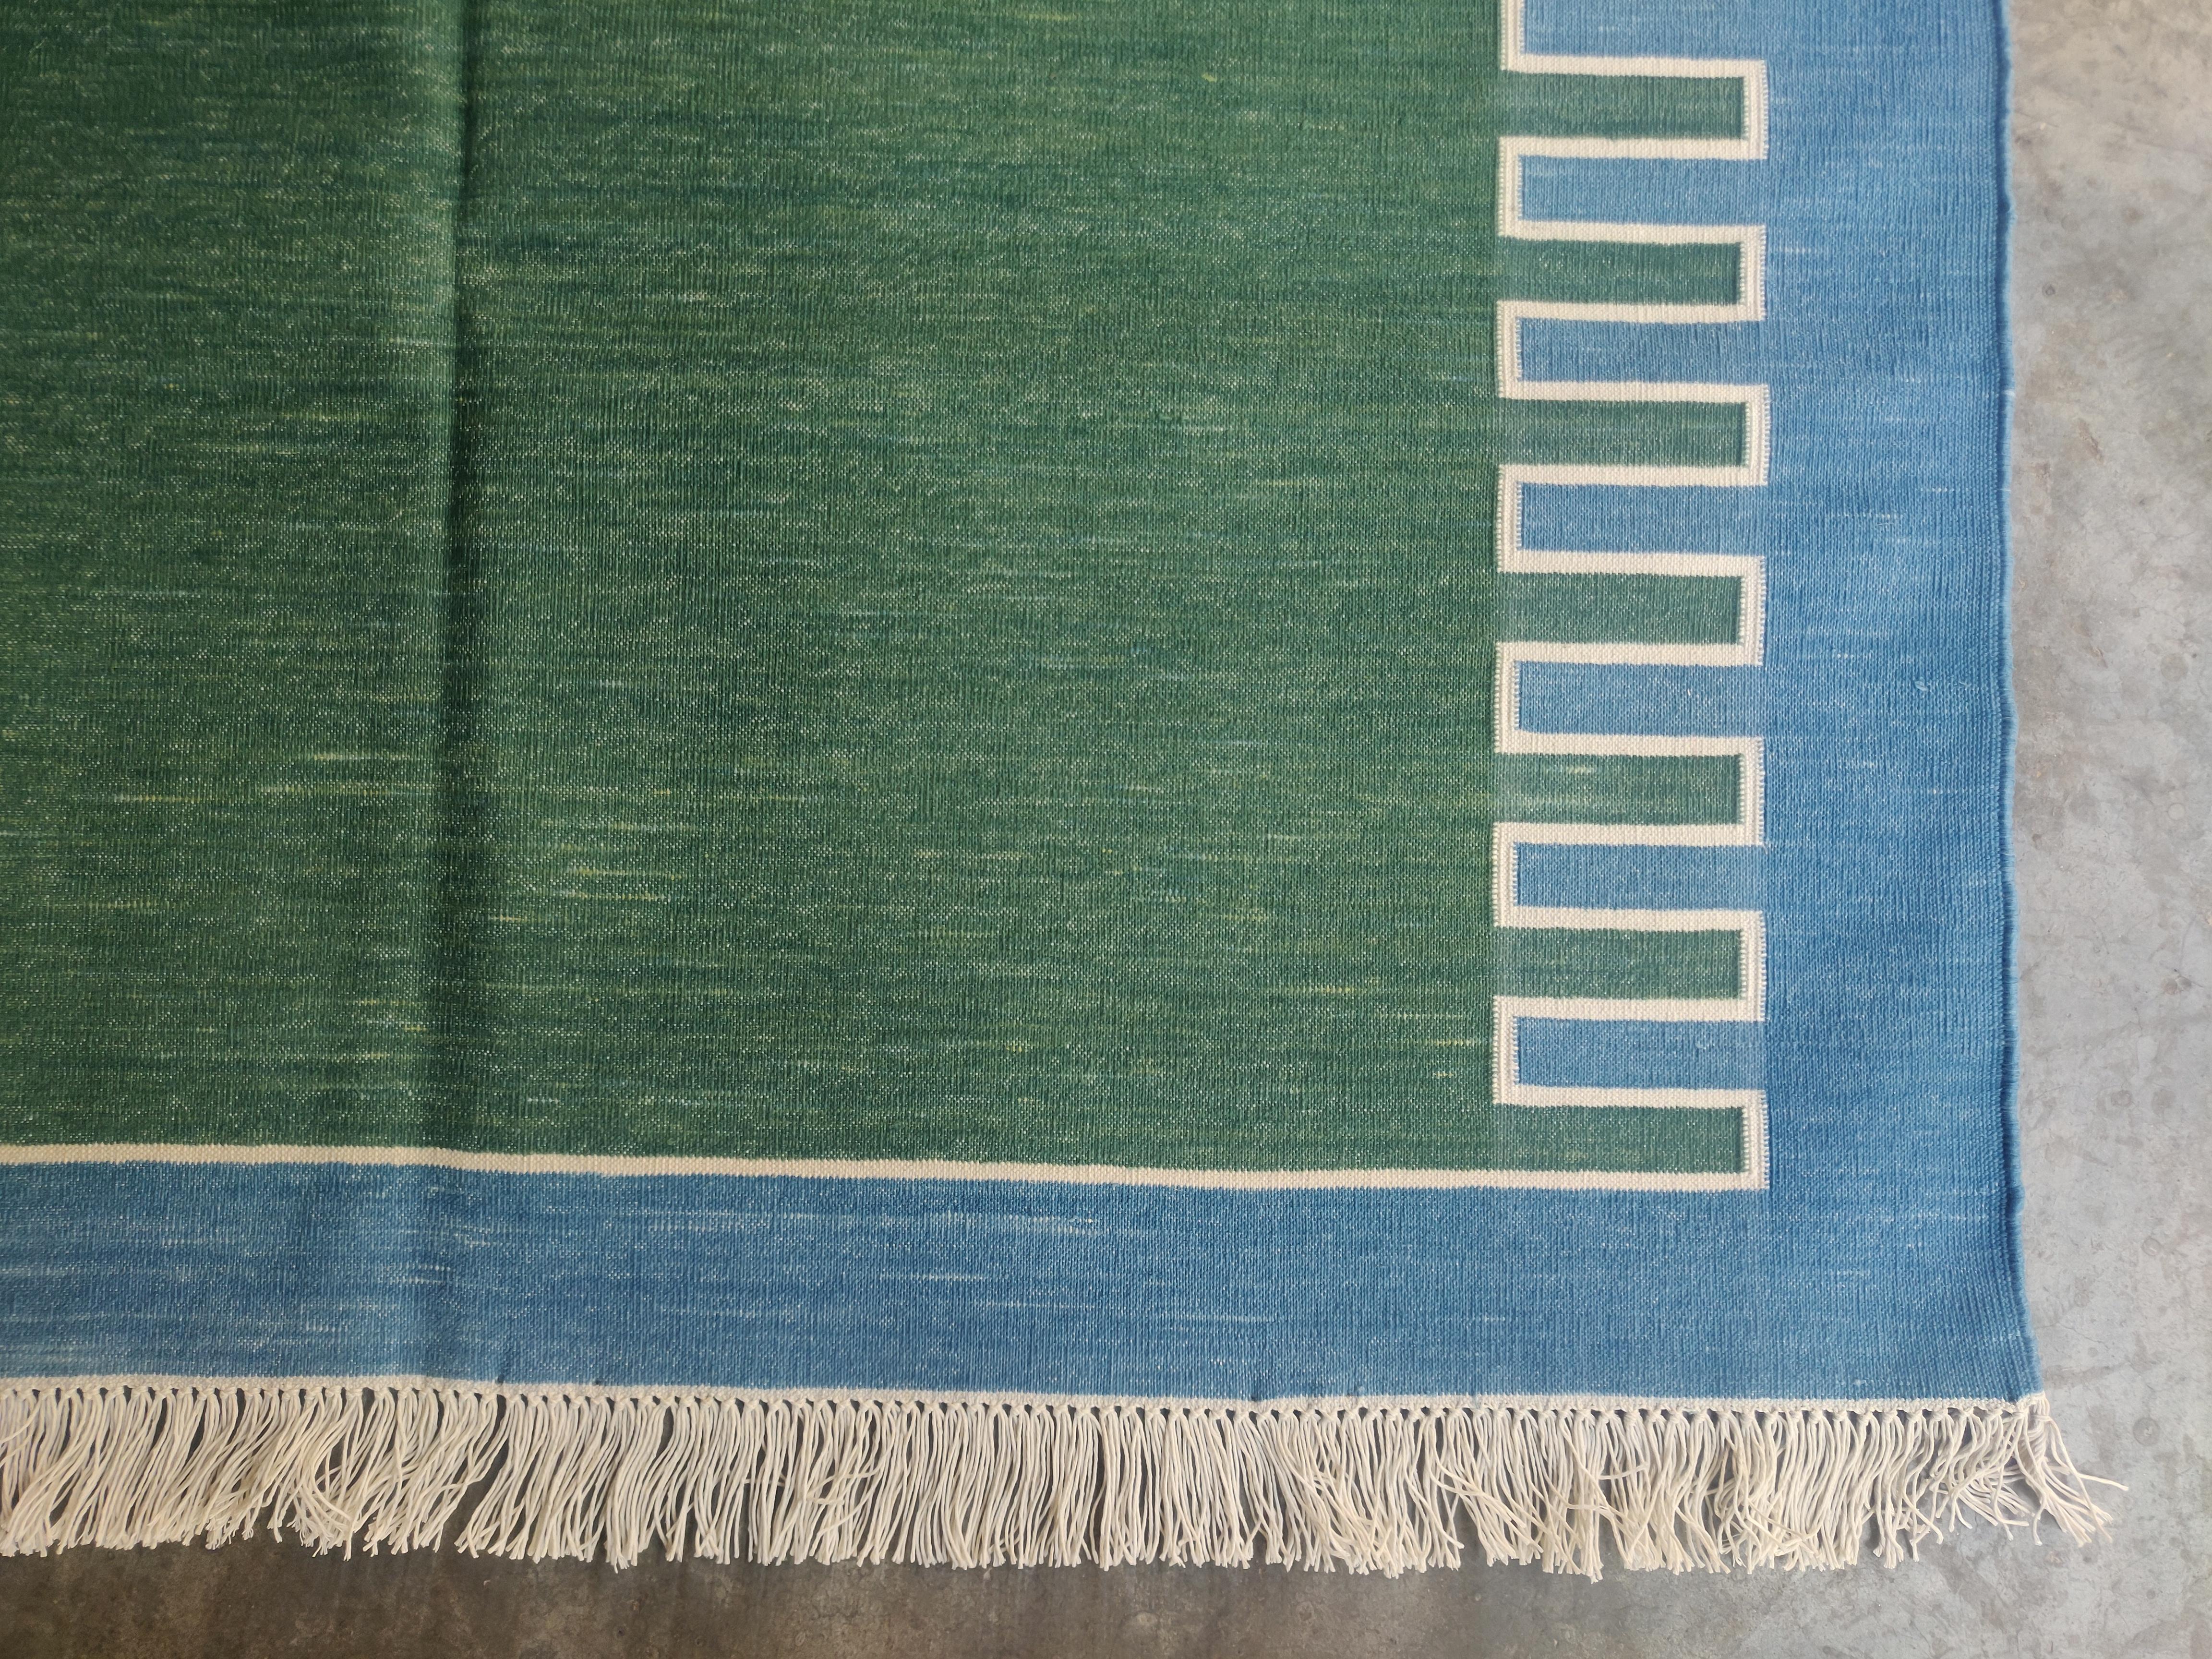 Hand-Woven Handmade Cotton Area Flat Weave Rug, 4x6 Green And Blue Zig Zag Striped Dhurrie For Sale